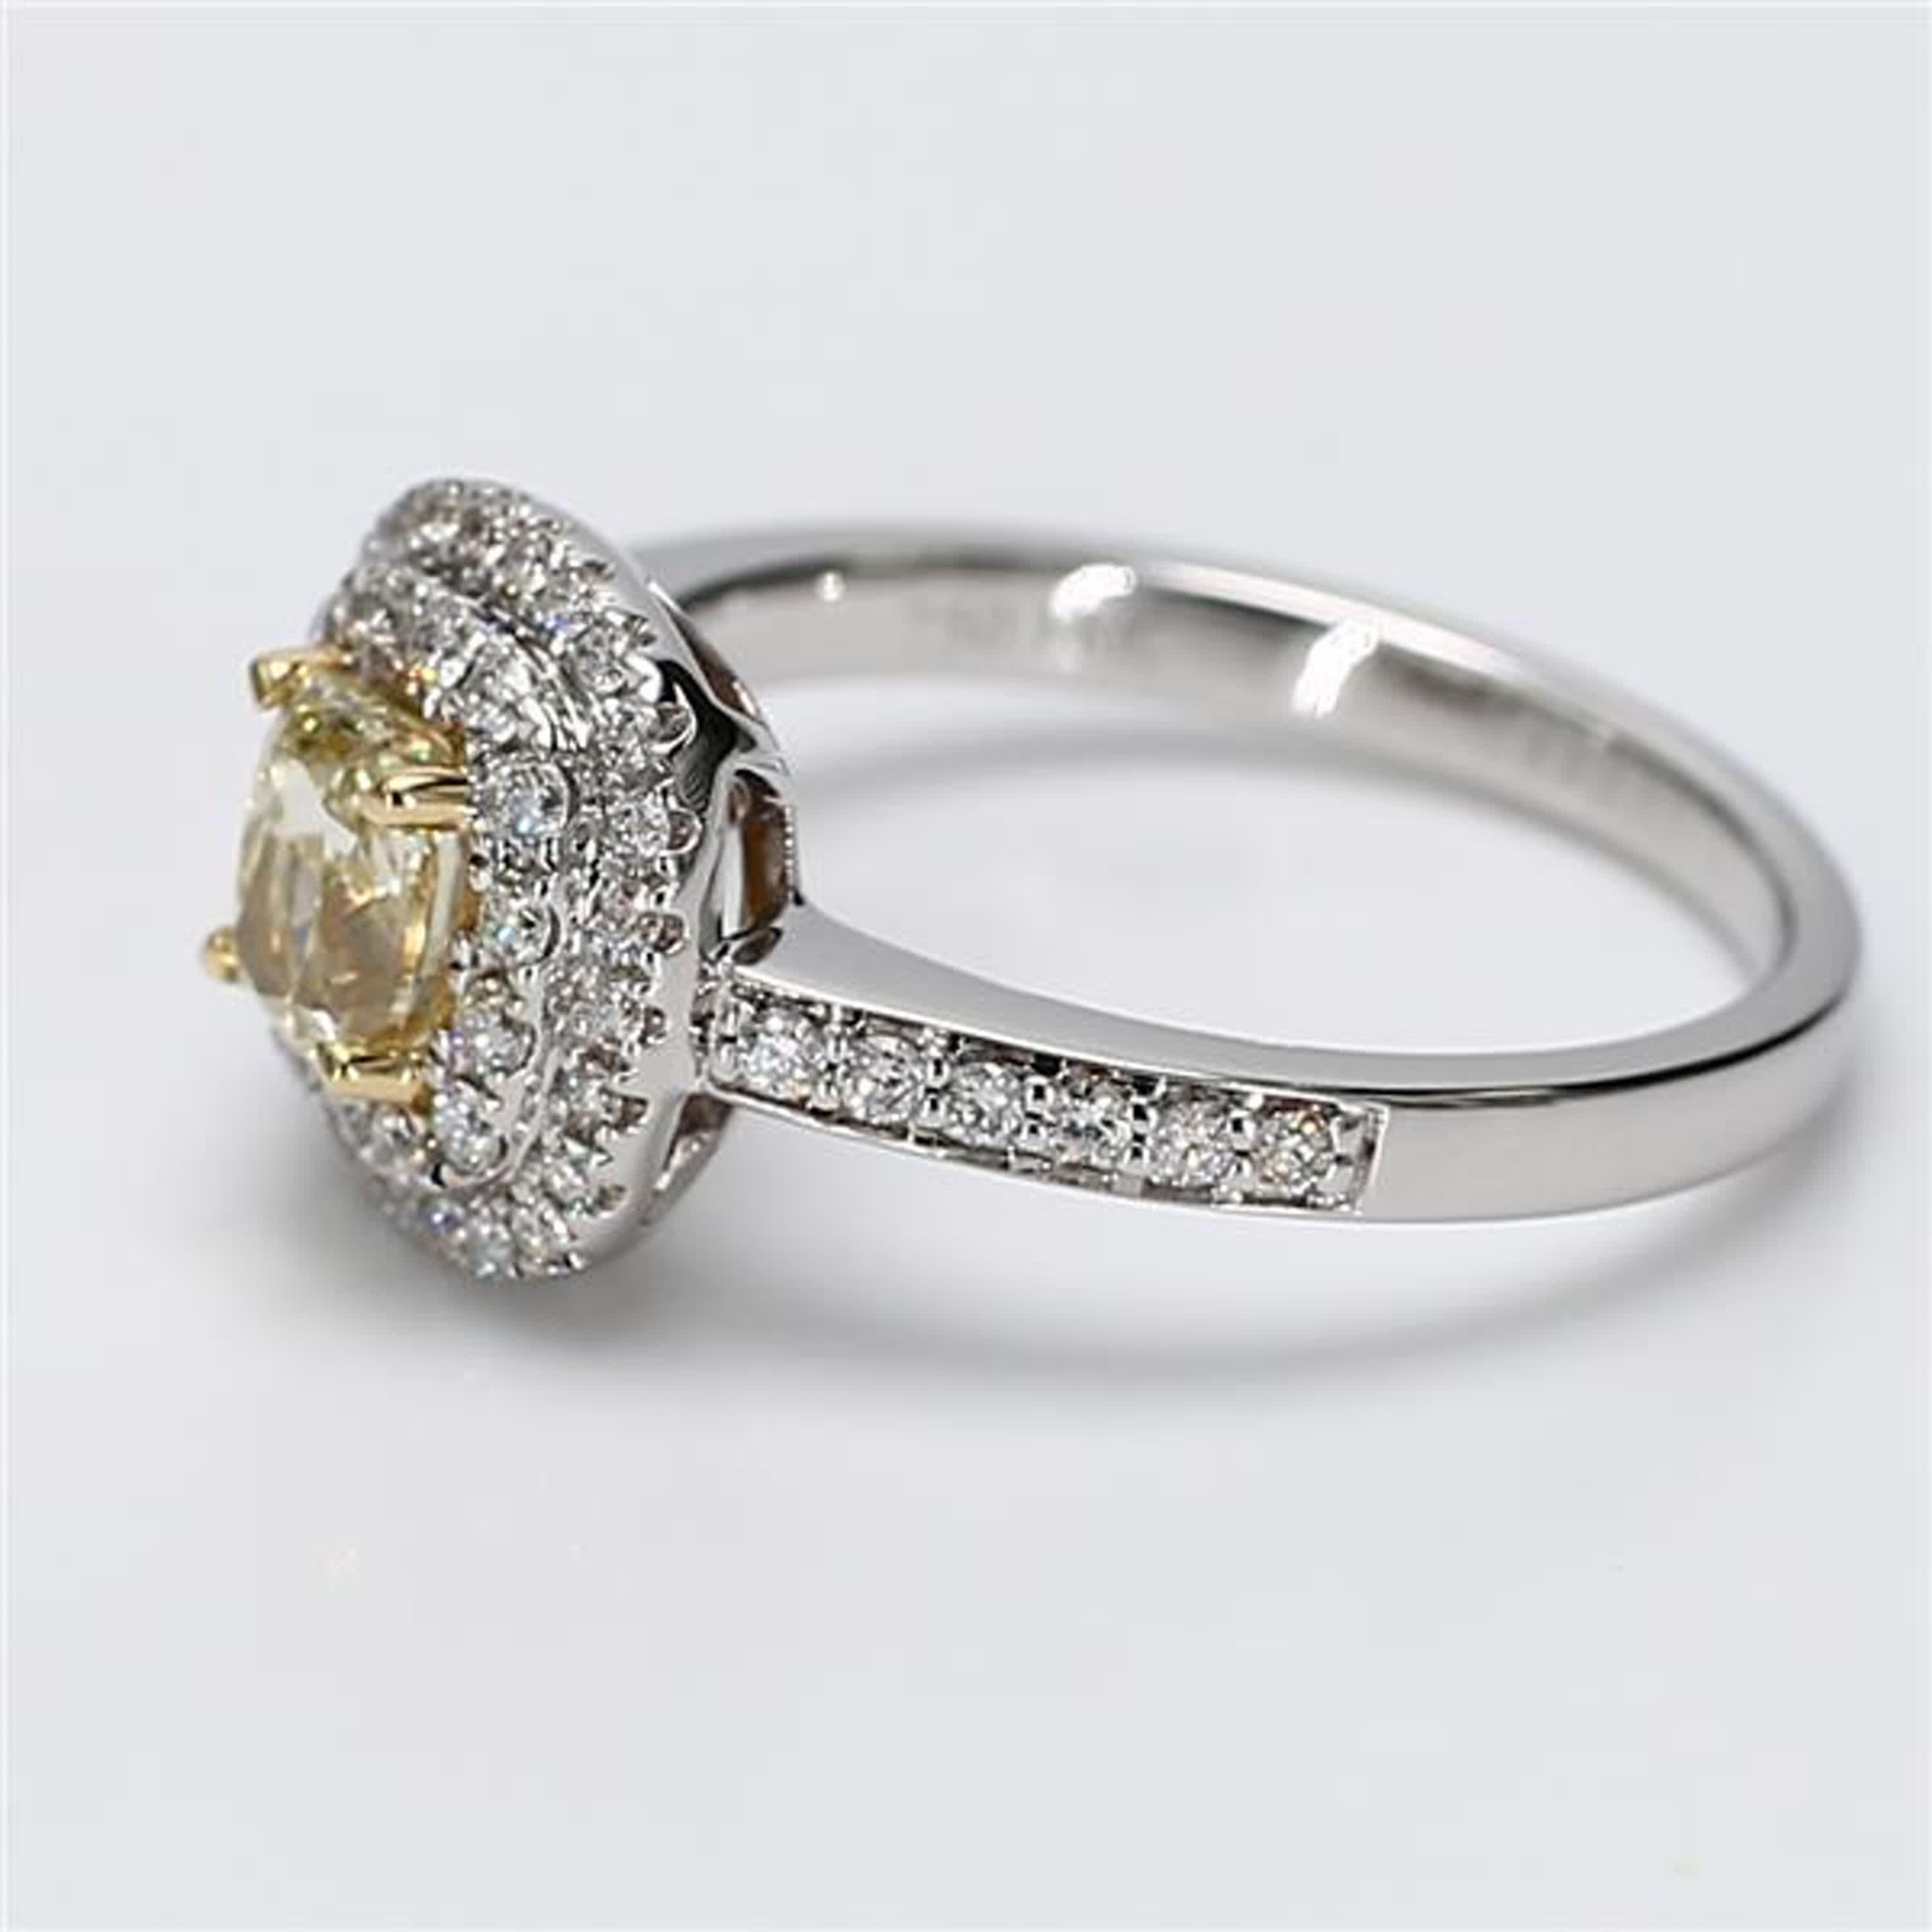 RareGemWorld's classic diamond ring. Mounted in a beautiful 18K Yellow and White Gold setting with a natural cushion cut yellow diamond. The yellow diamond is surrounded by round natural white diamond melee. This ring is guaranteed to impress and